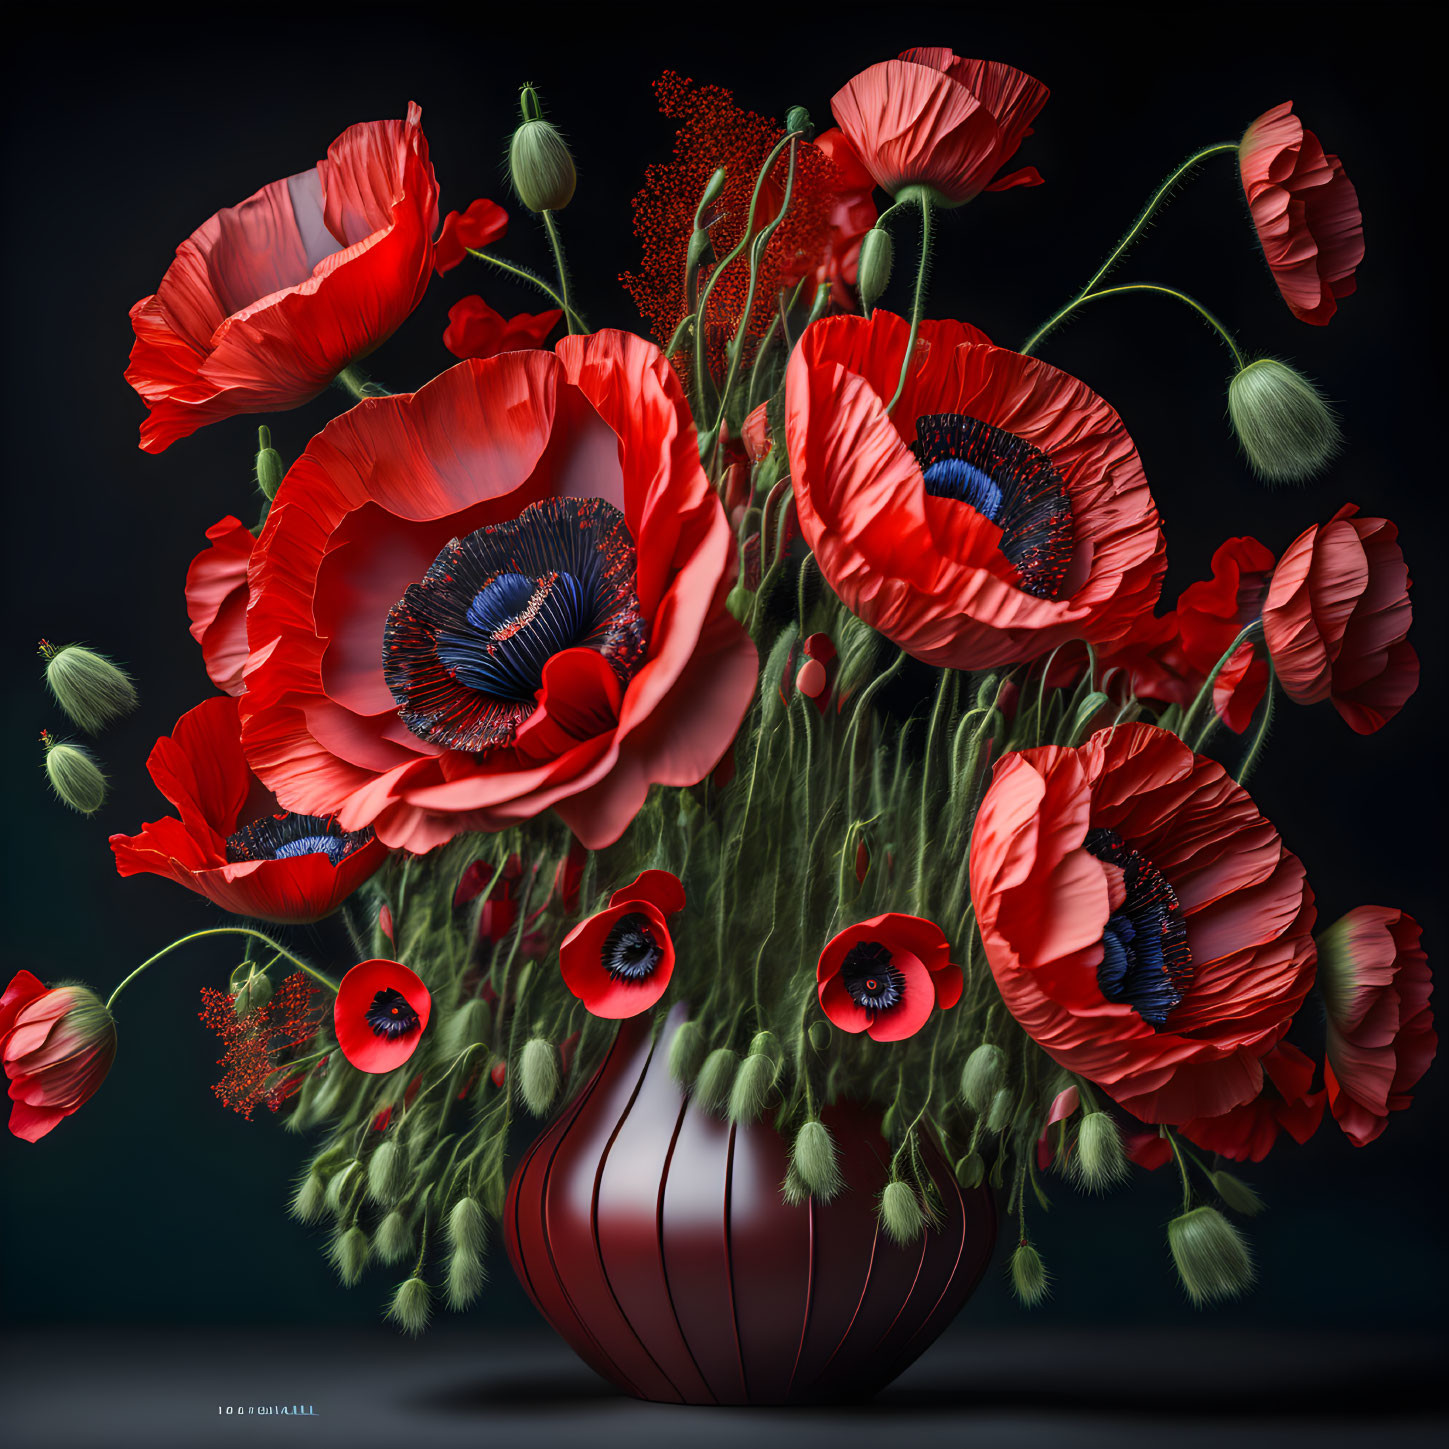 Bright red poppies with dark centers in a vase against a dark background